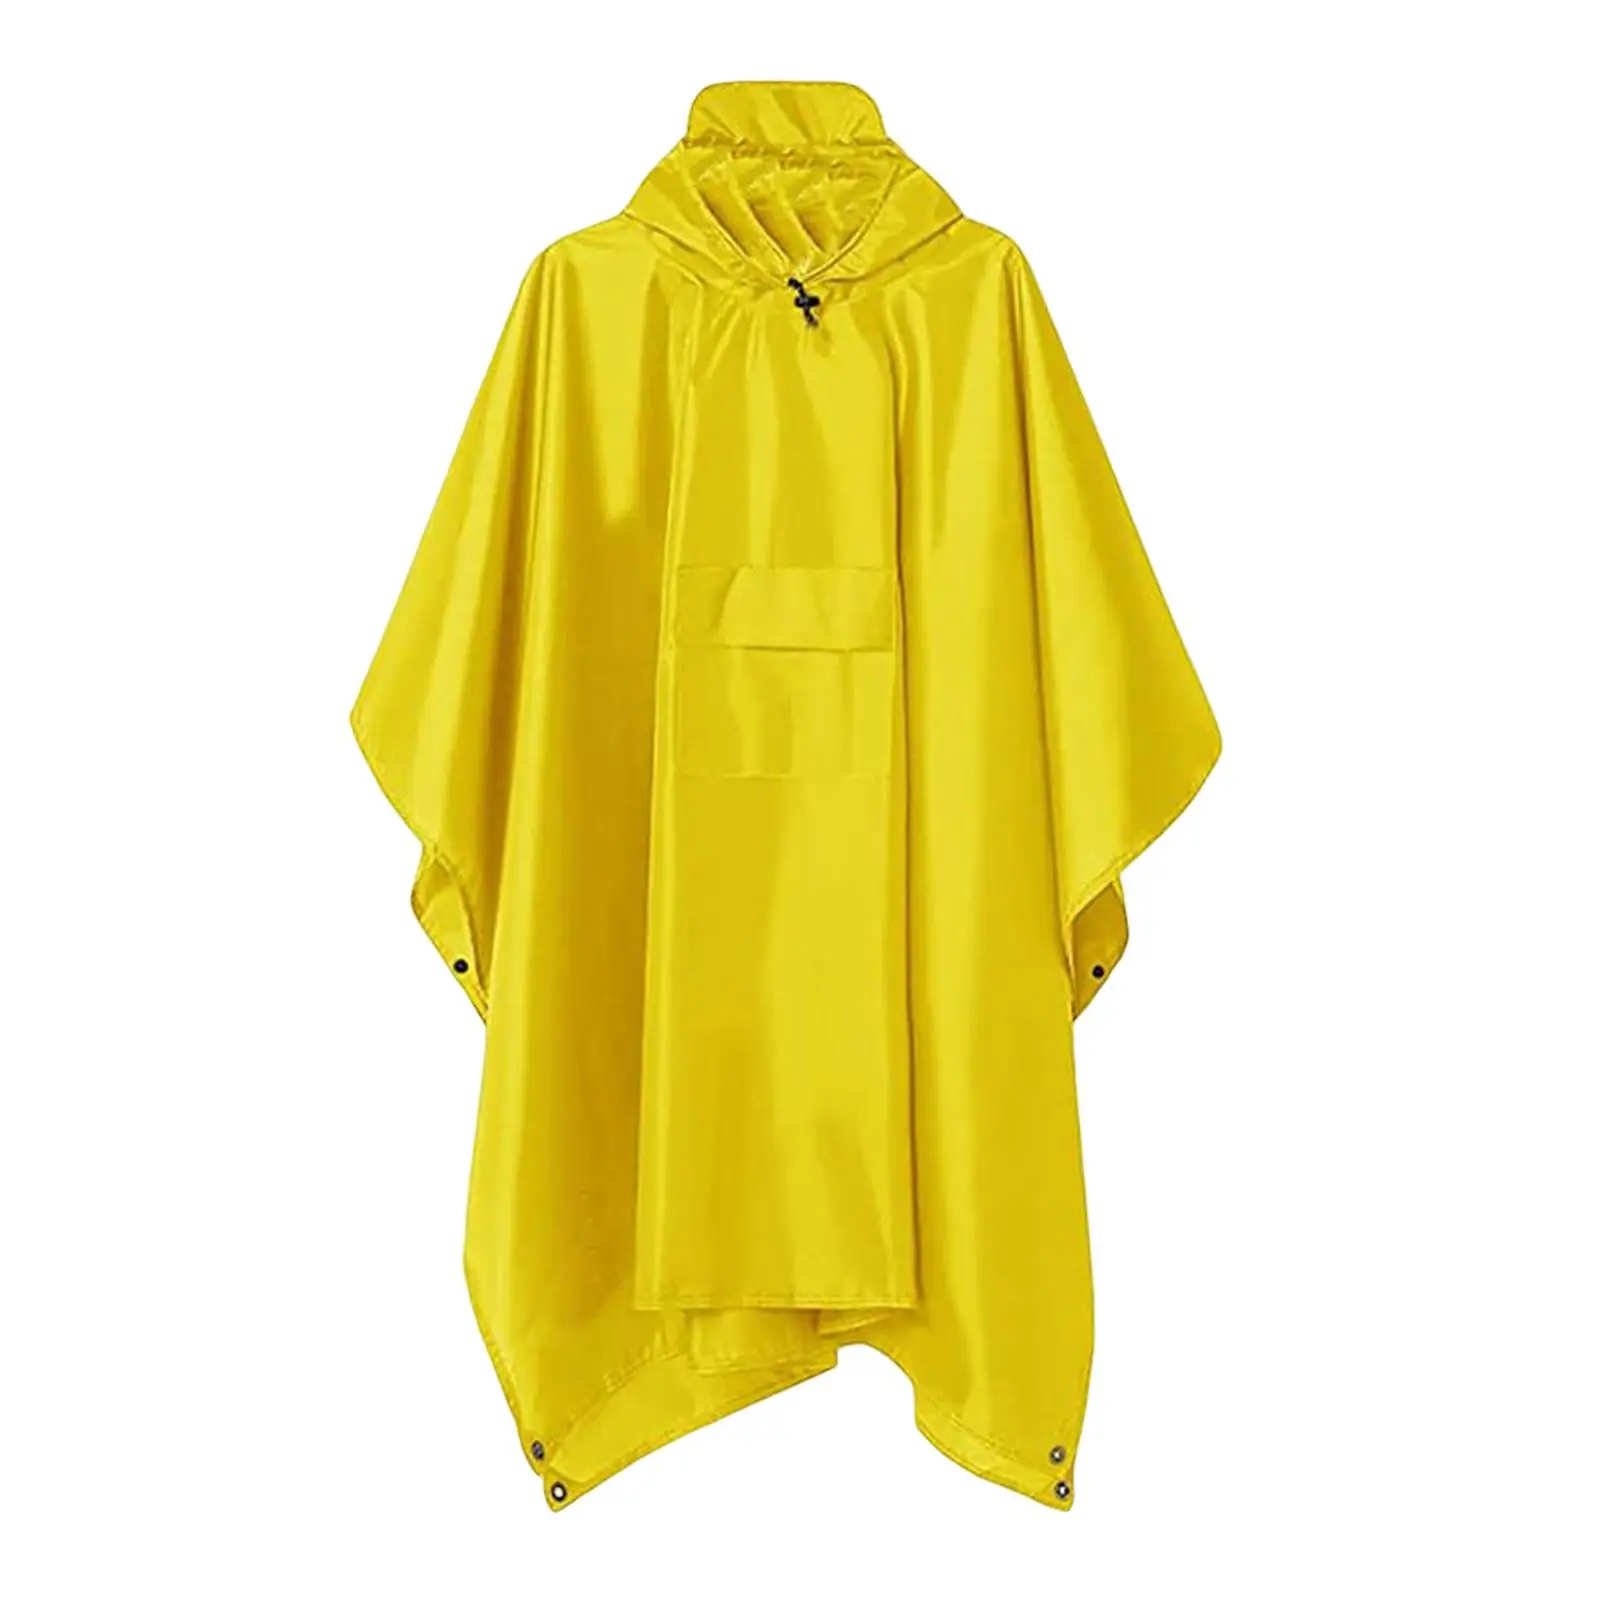 Hooded Rain Poncho for Adult with Pocket, WaterLightweight Unisex Raincoat for Hiking, Camping